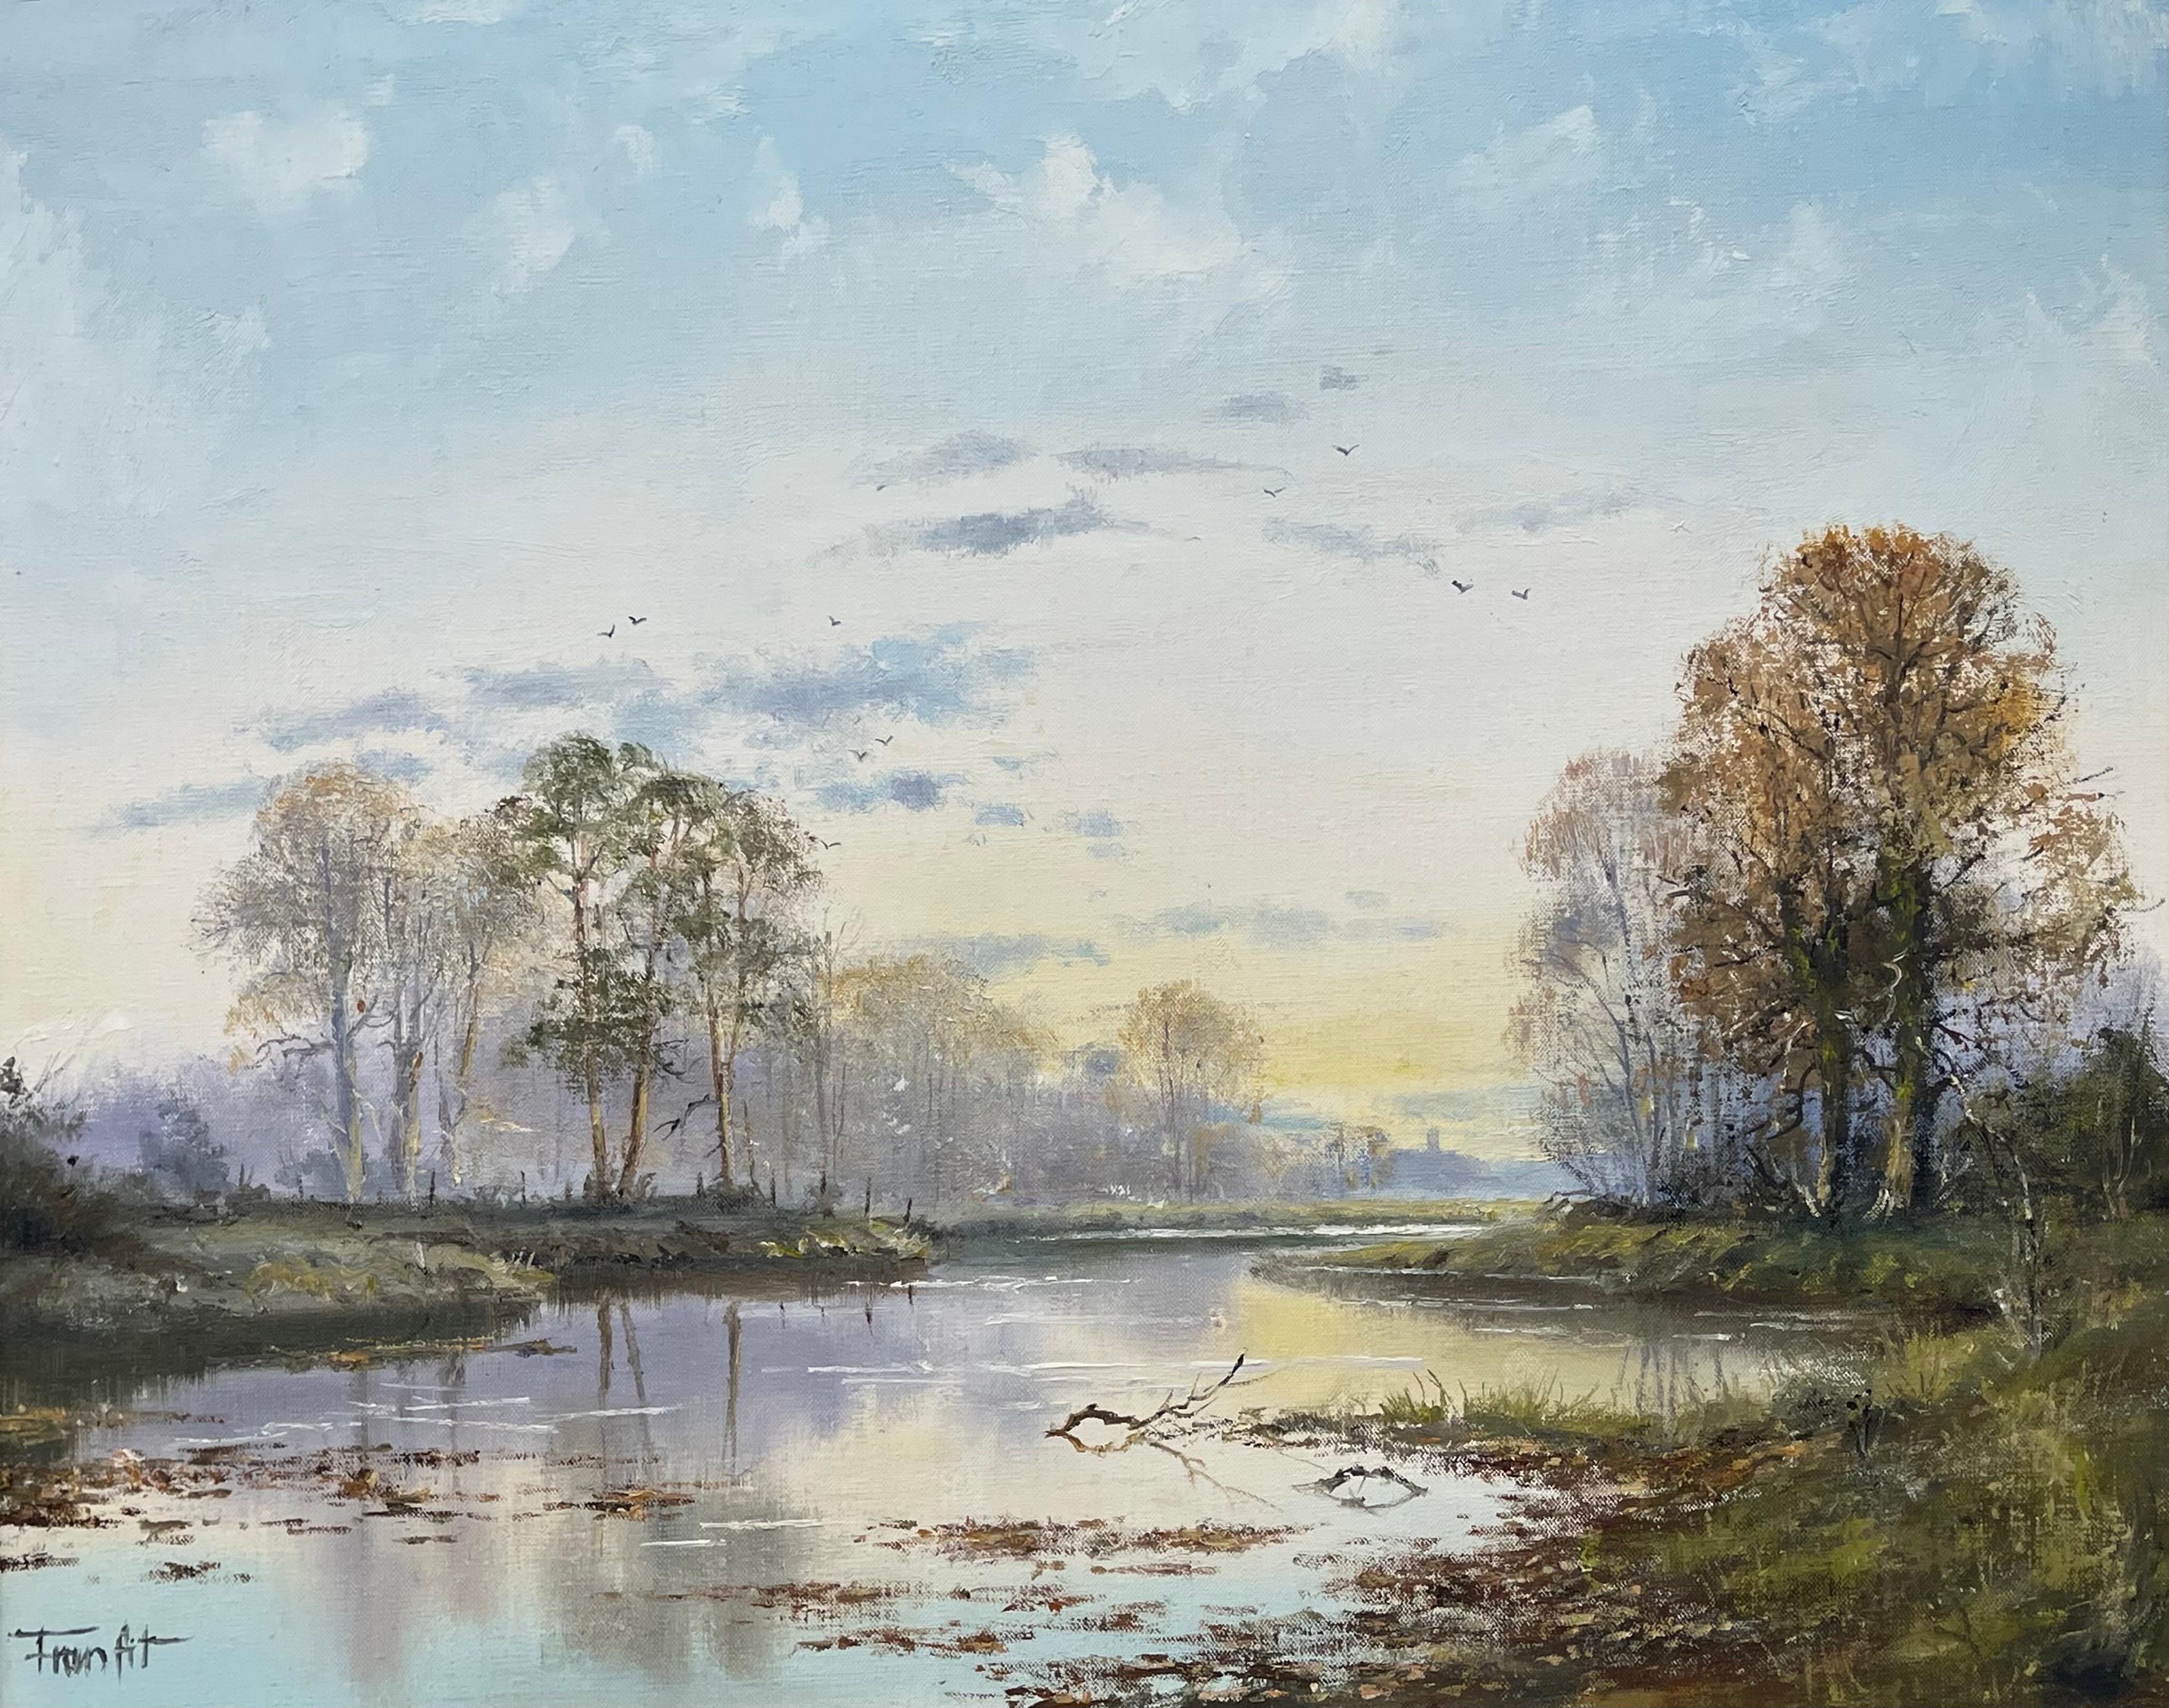 Idyllic River Landscape at Sunset in Ireland by Contemporary Irish Artist, Frank Fitzsimons 

Art measures 20 x 16 inches
Frame measure 23 x 19 inches 

Frank Fitzsimons was born in Antrim but grew up in Bangor, Co Down in the 1930’s. Fitzsimons